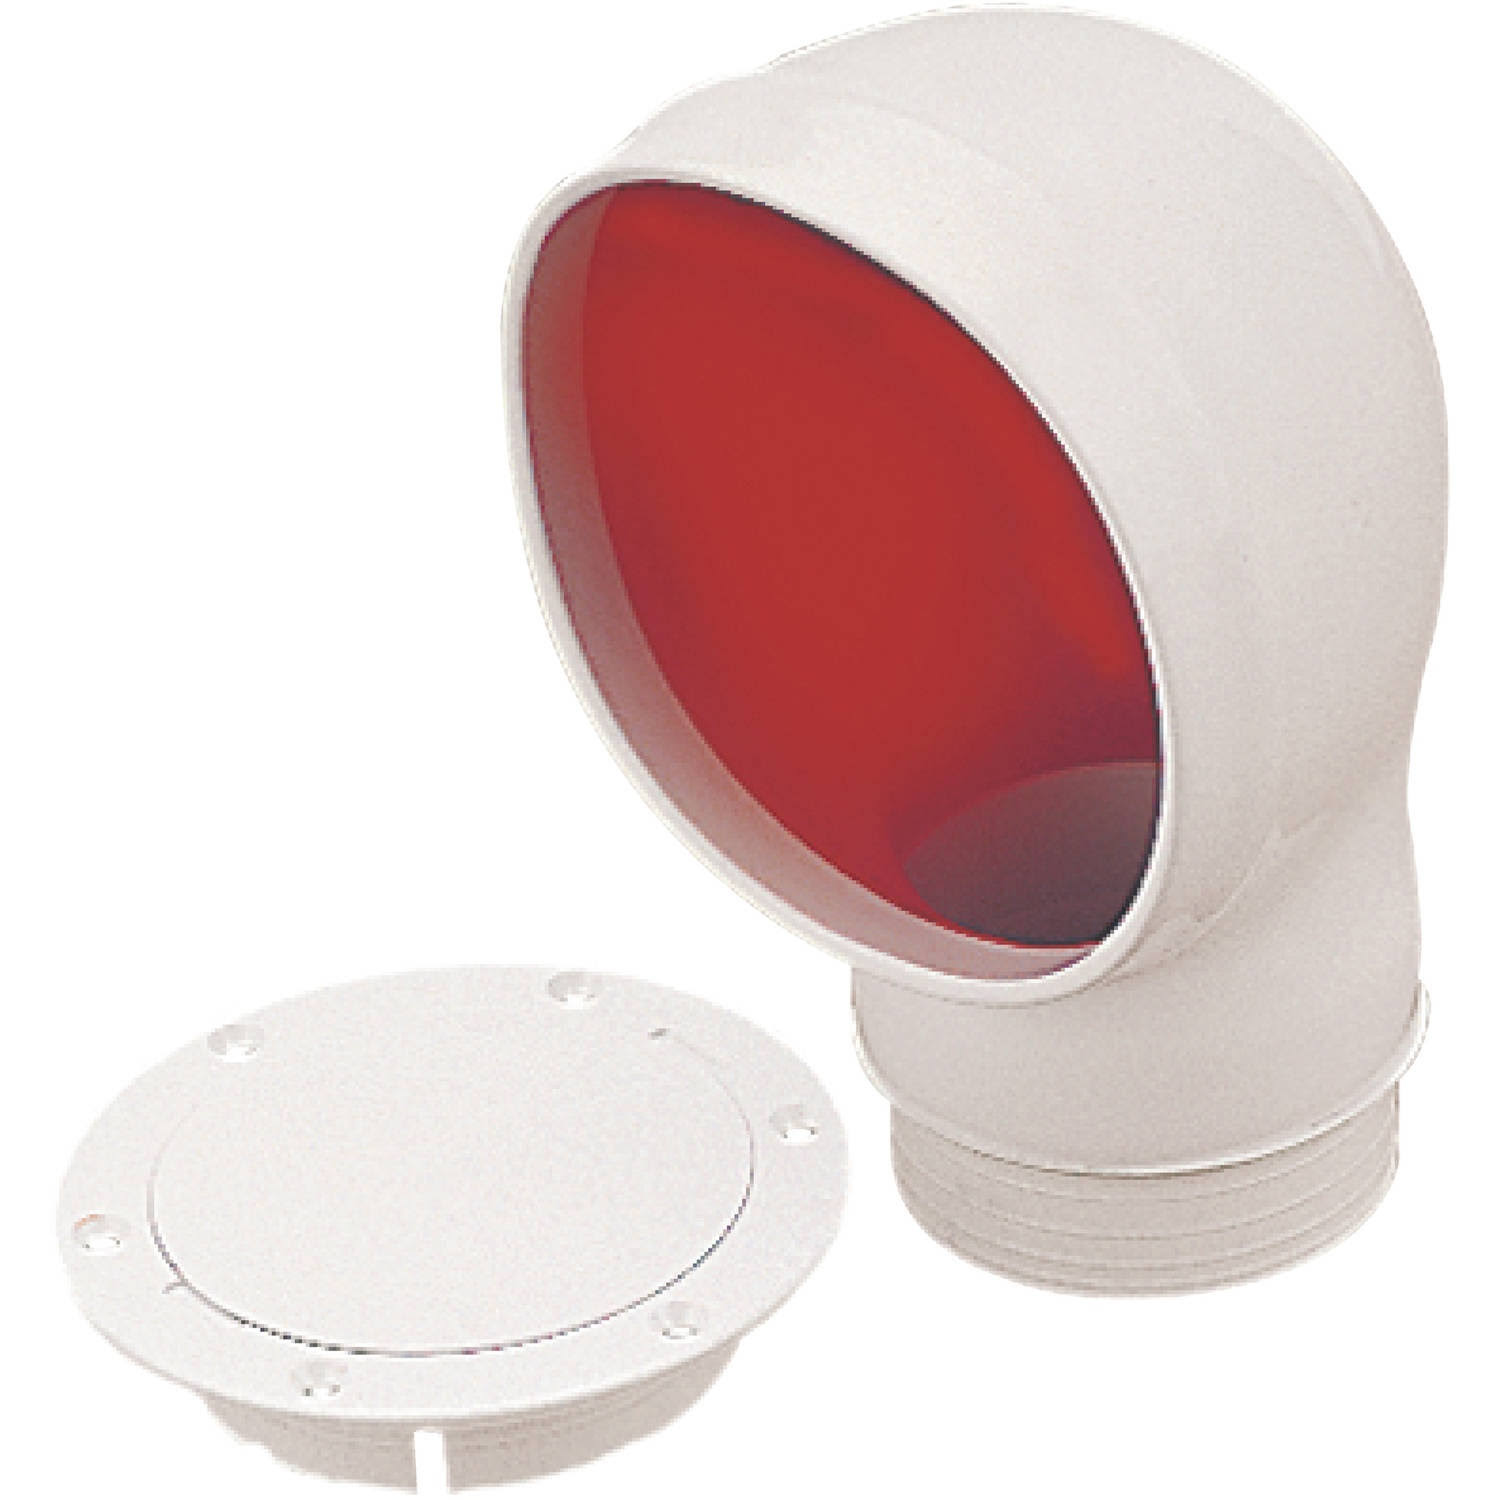 Seadog PVC Standard Profile Cowl Vent and Snap on Deck Plate | Boating & Fishing | Delivery Guaranteed | 30 Day Money Back Guarantee